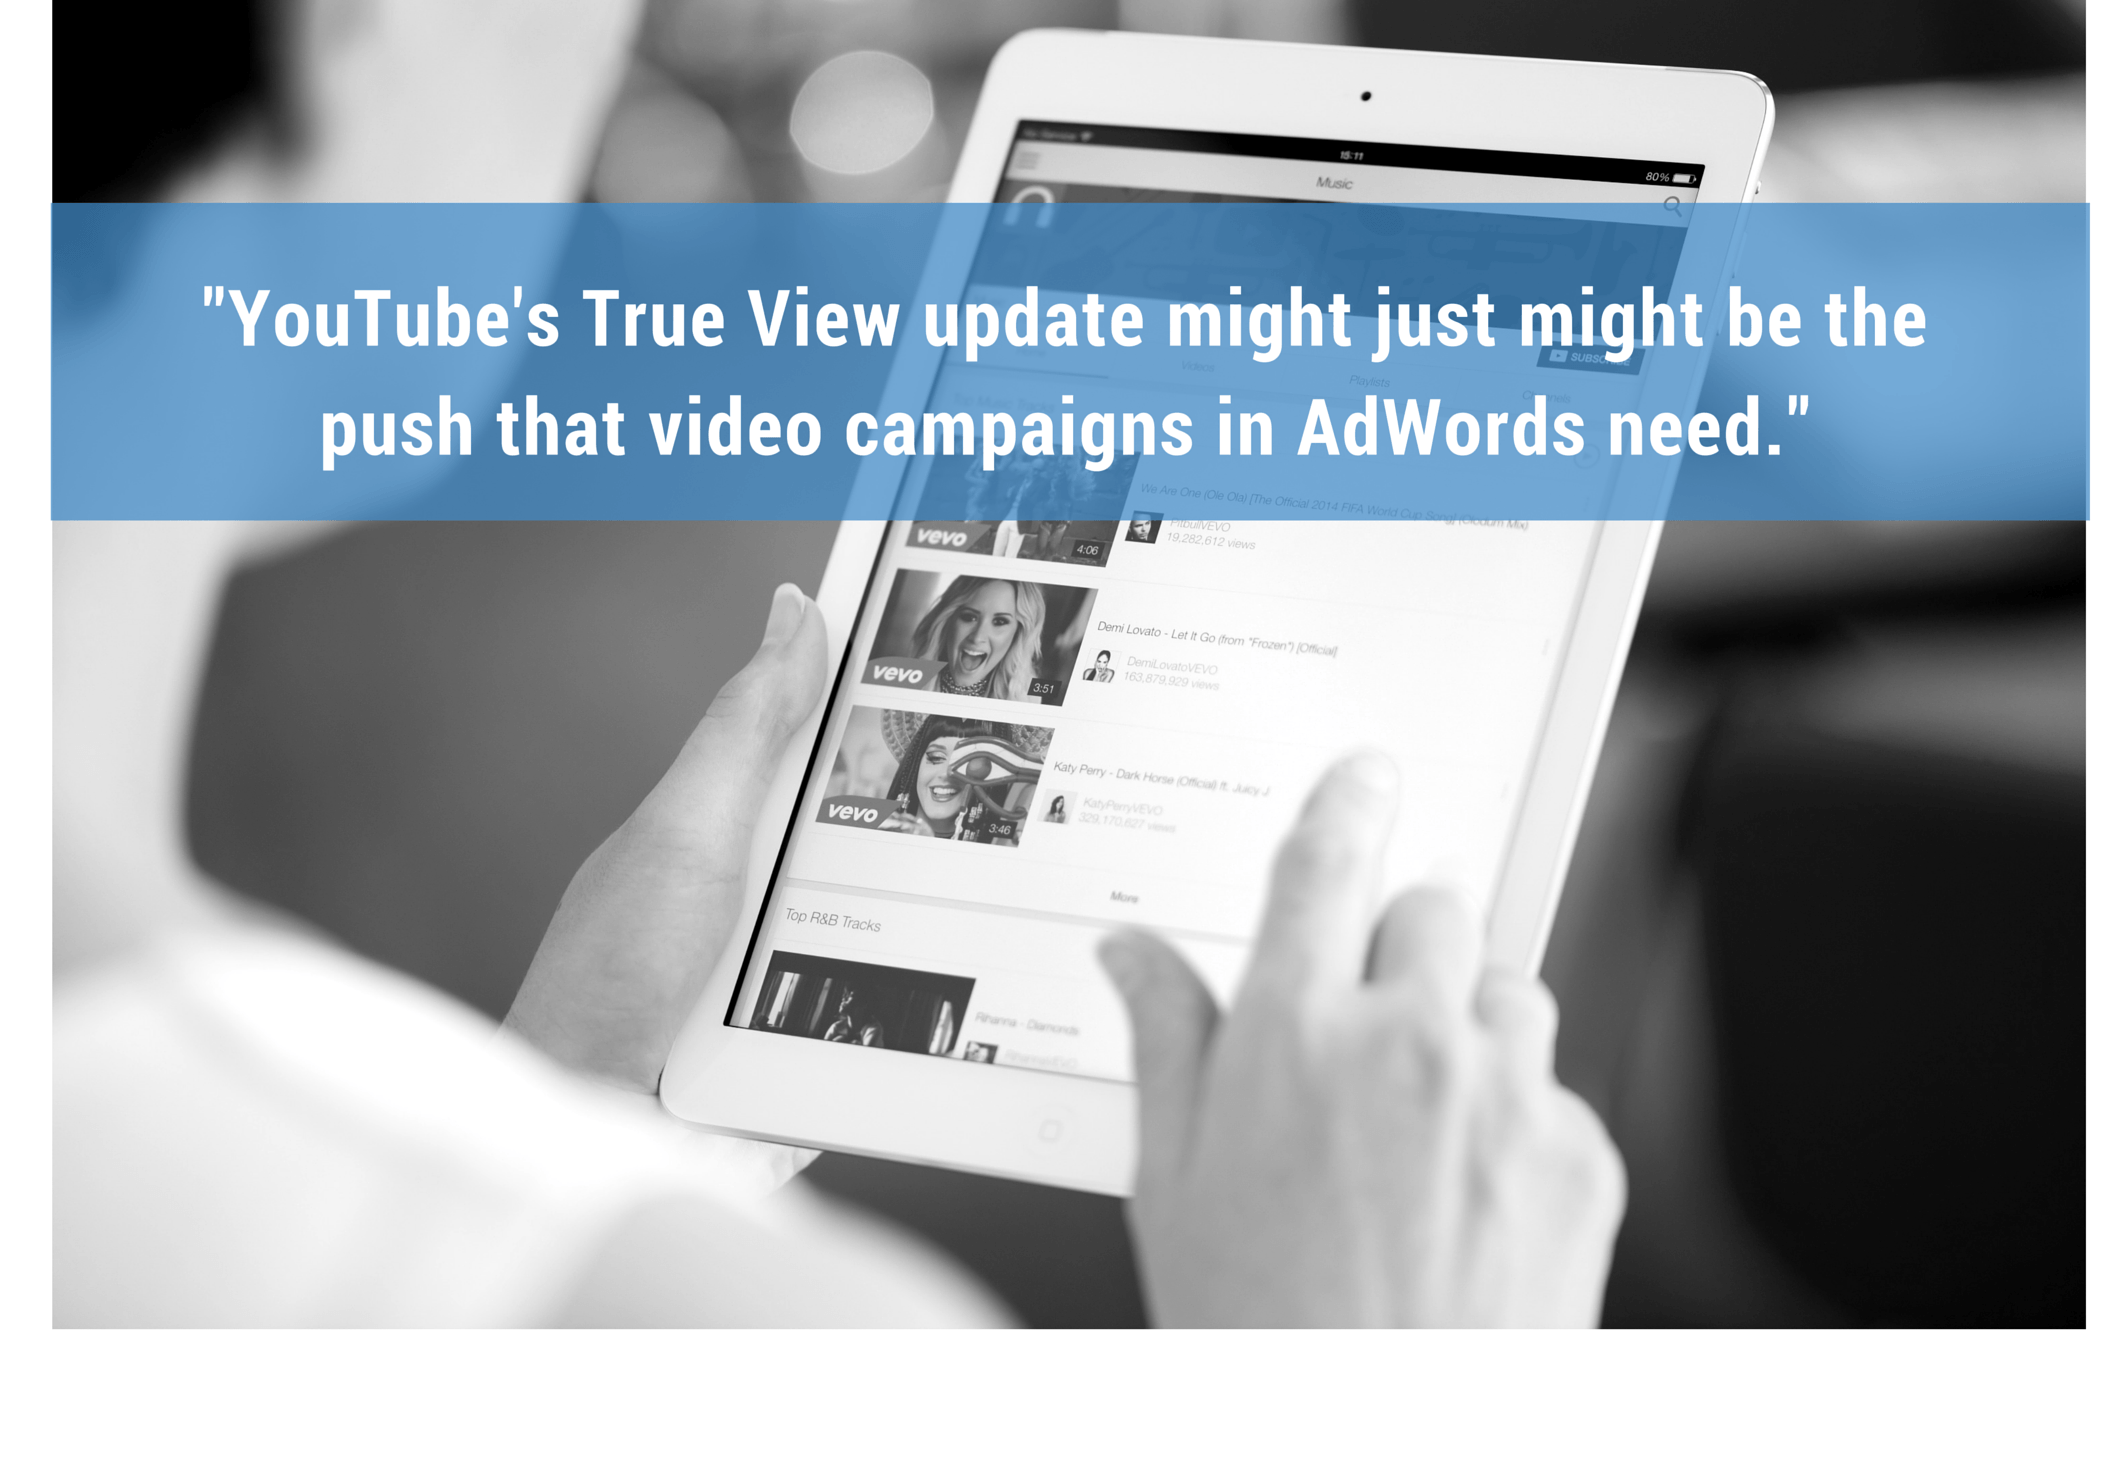 True View update might just be the push that video campaigns in AdWords need